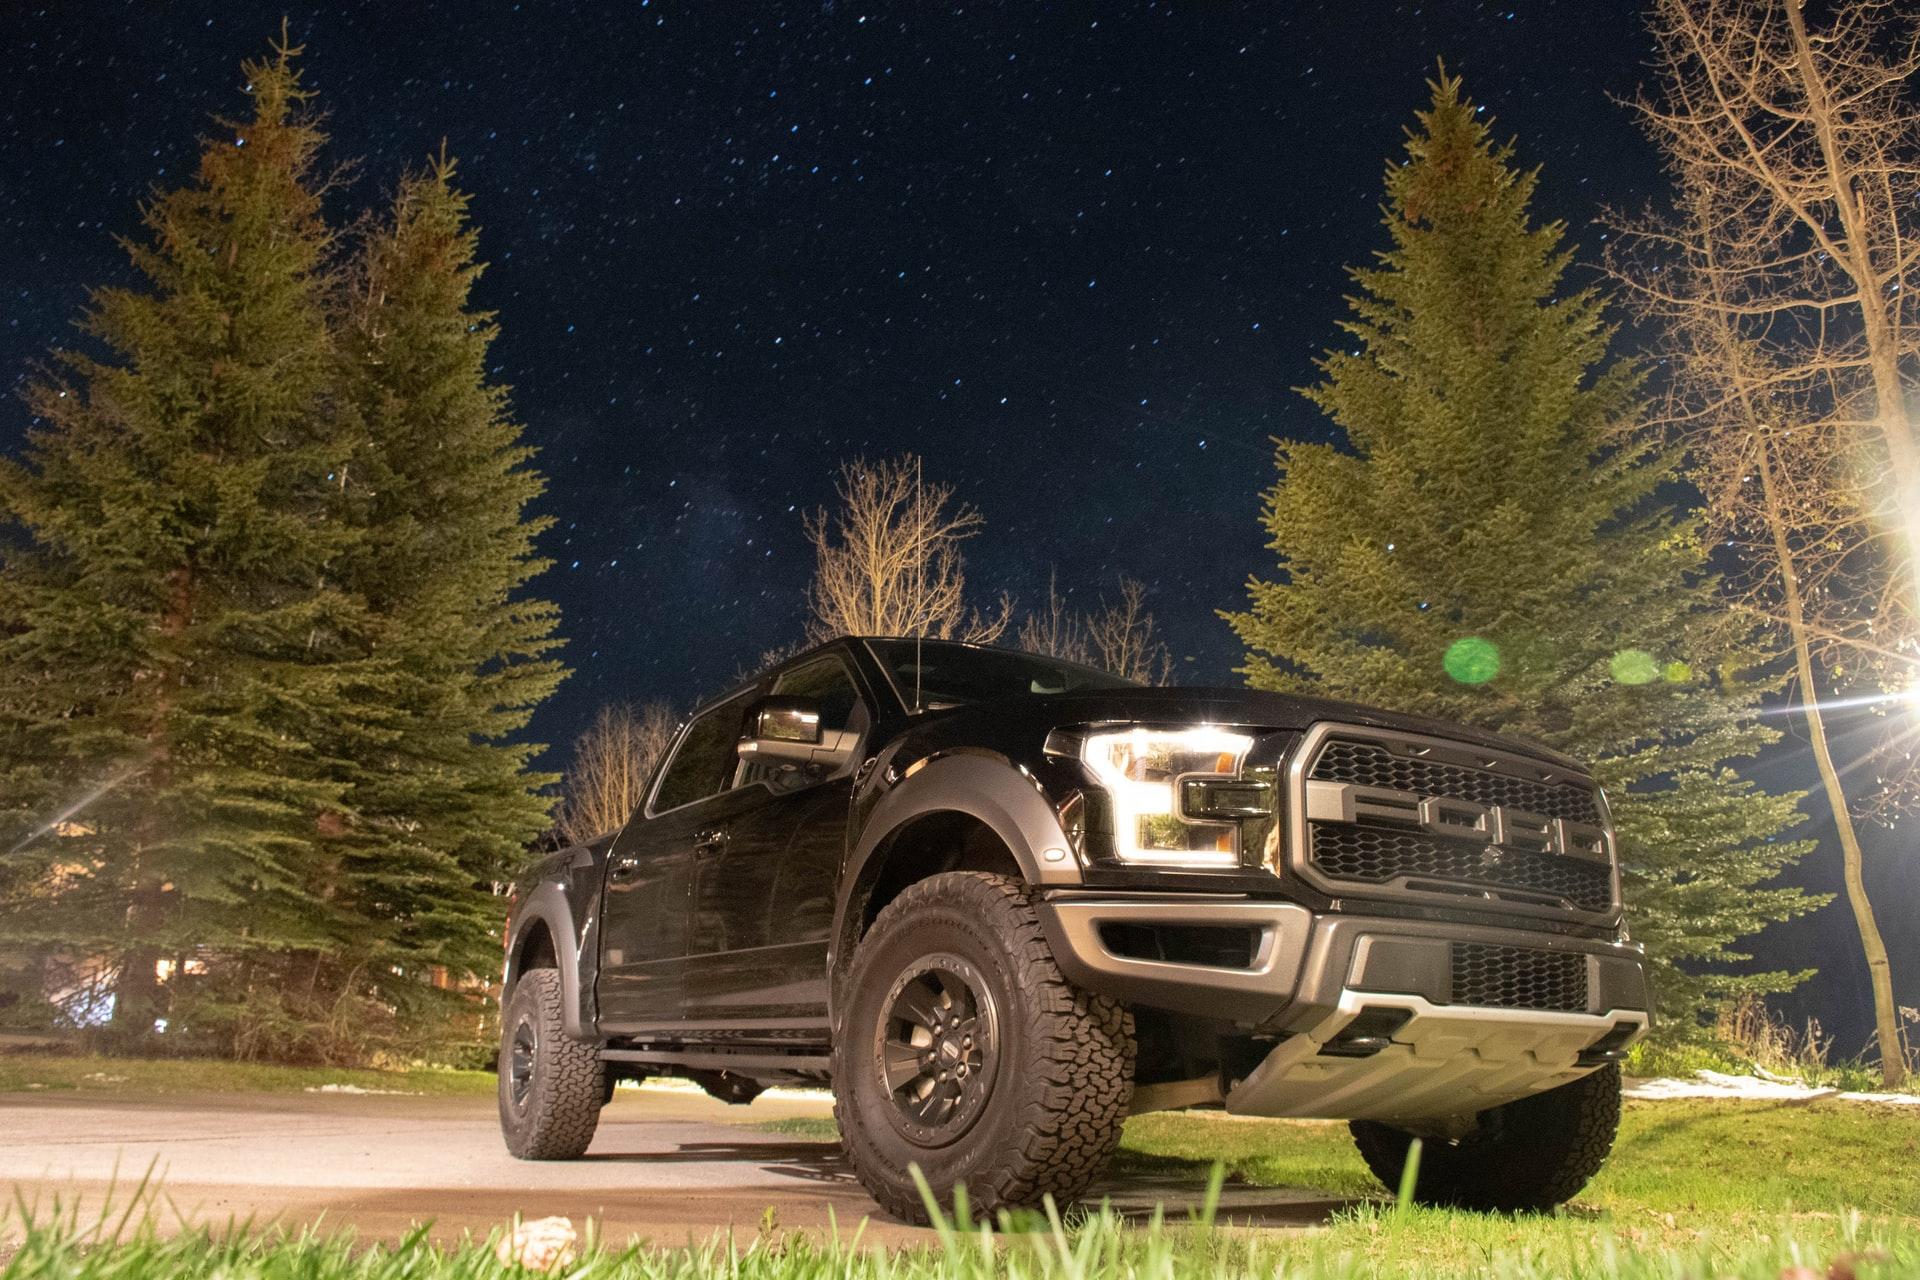 The Ford Raptor and F-150 Tremor package are formidable off-roading machines.